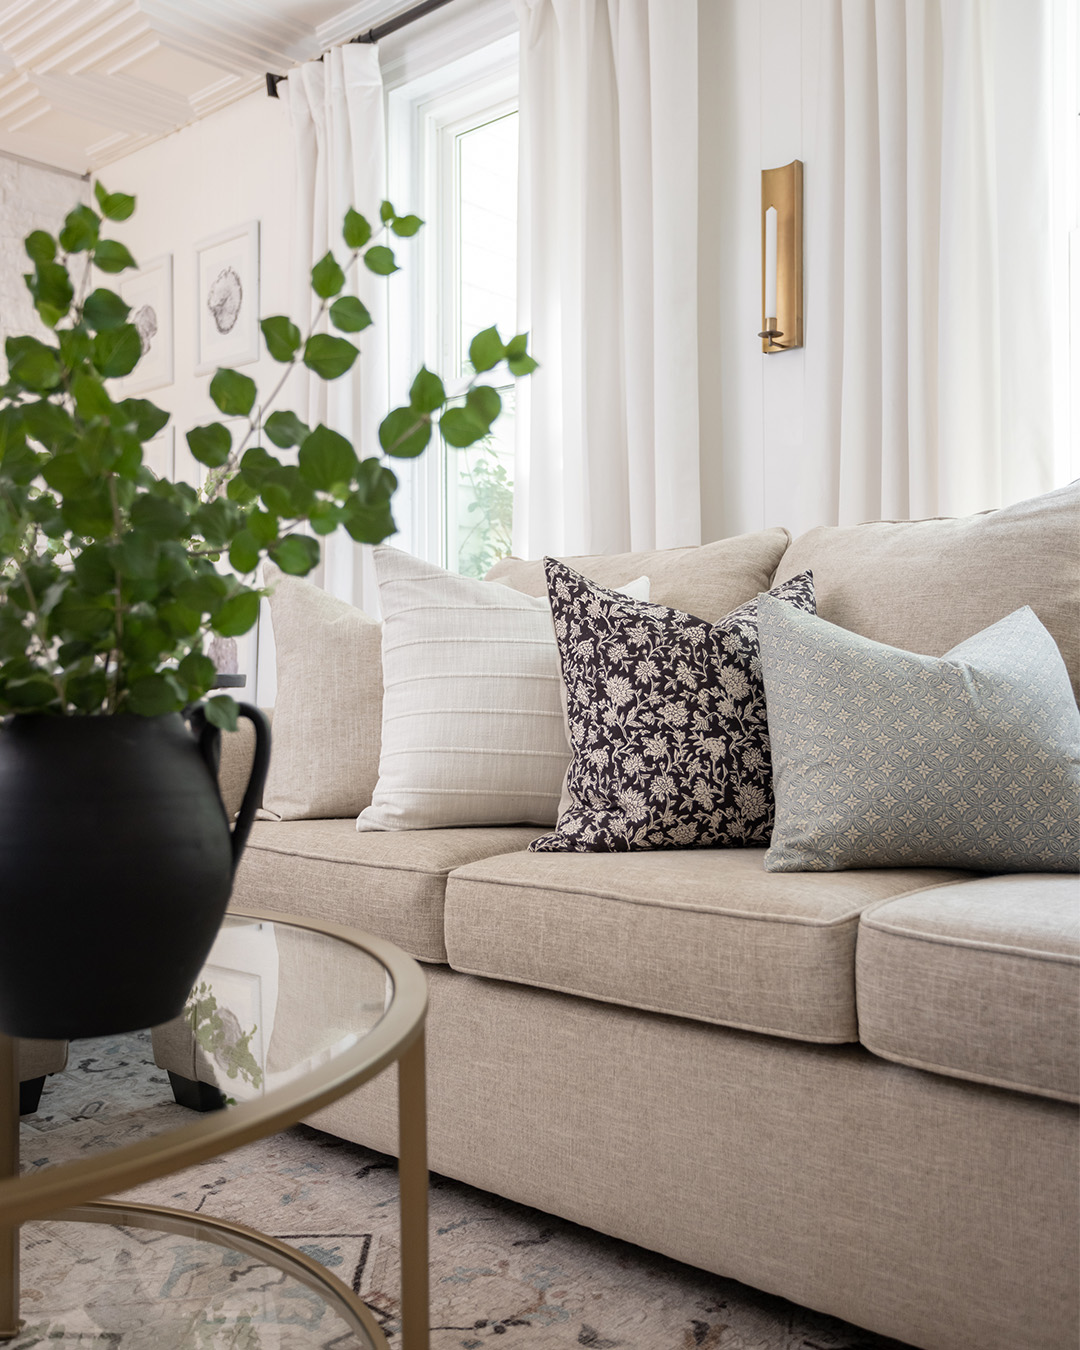 If your sofa is starting to look a little rough in some areas due to pilling, here's an easy trick to make it look almost as good as new again. Here's how to remove pills from upholstery fabric.